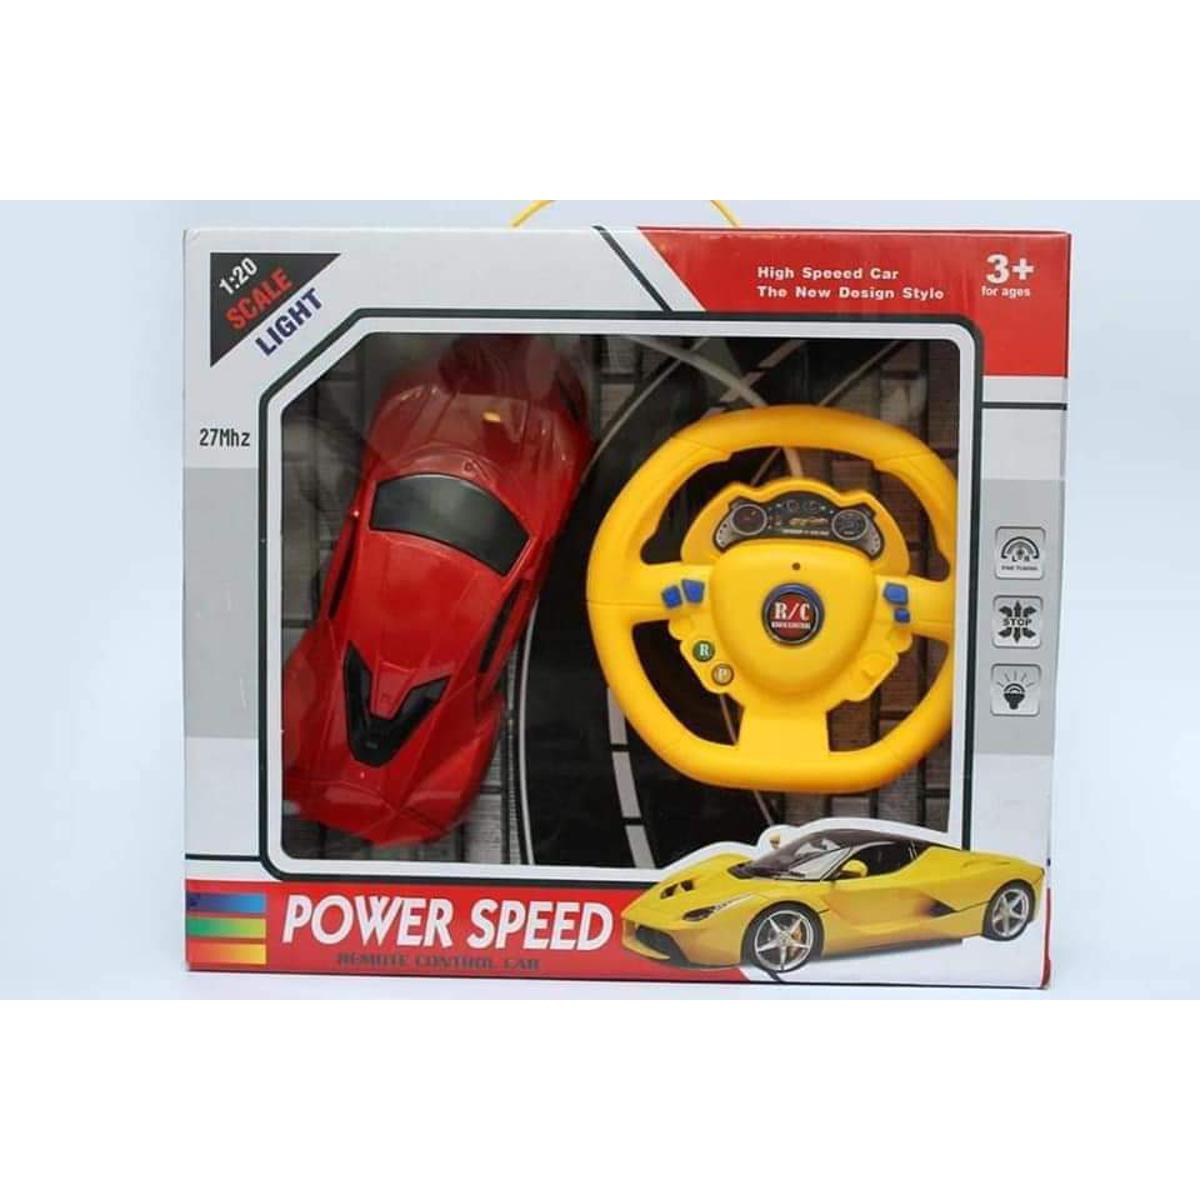 Remote control Car for kids best quality - One Click Shopping